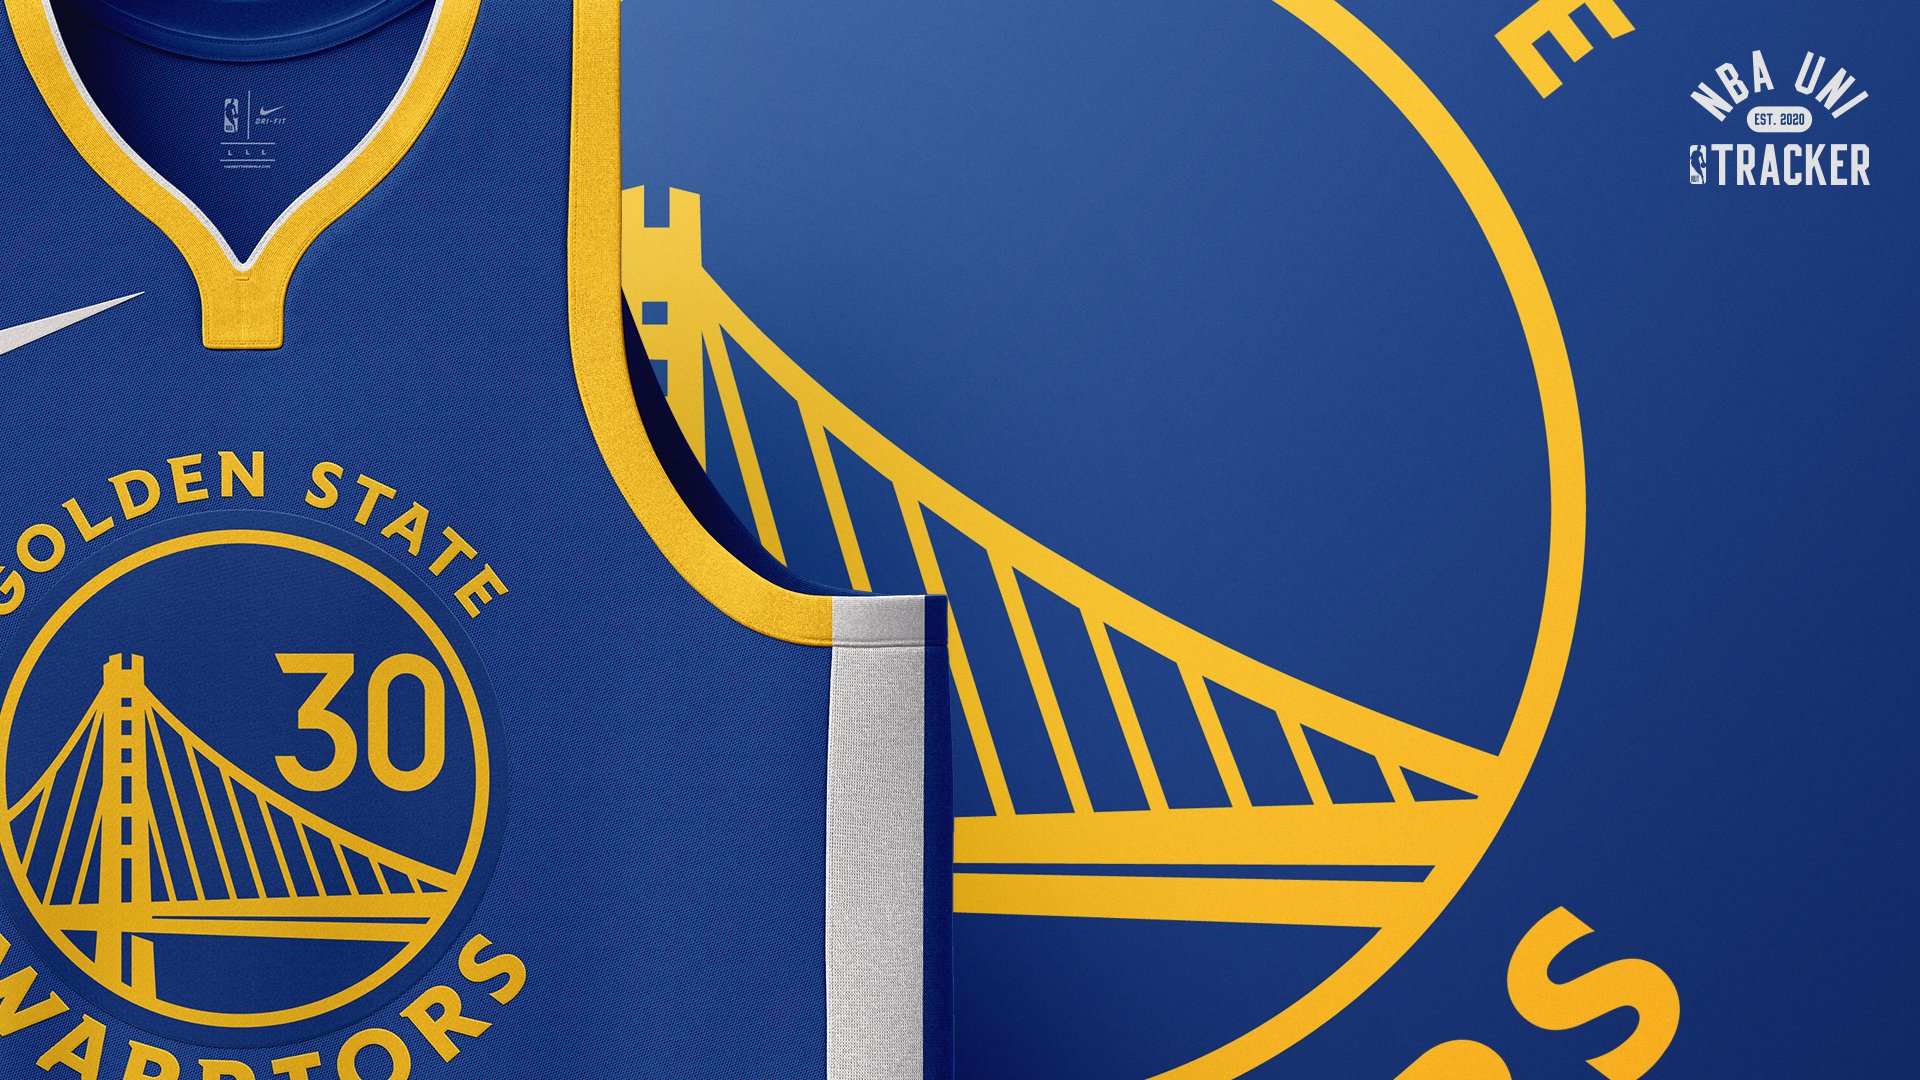 New Logos, Uniforms for Golden State Warriors in 2020